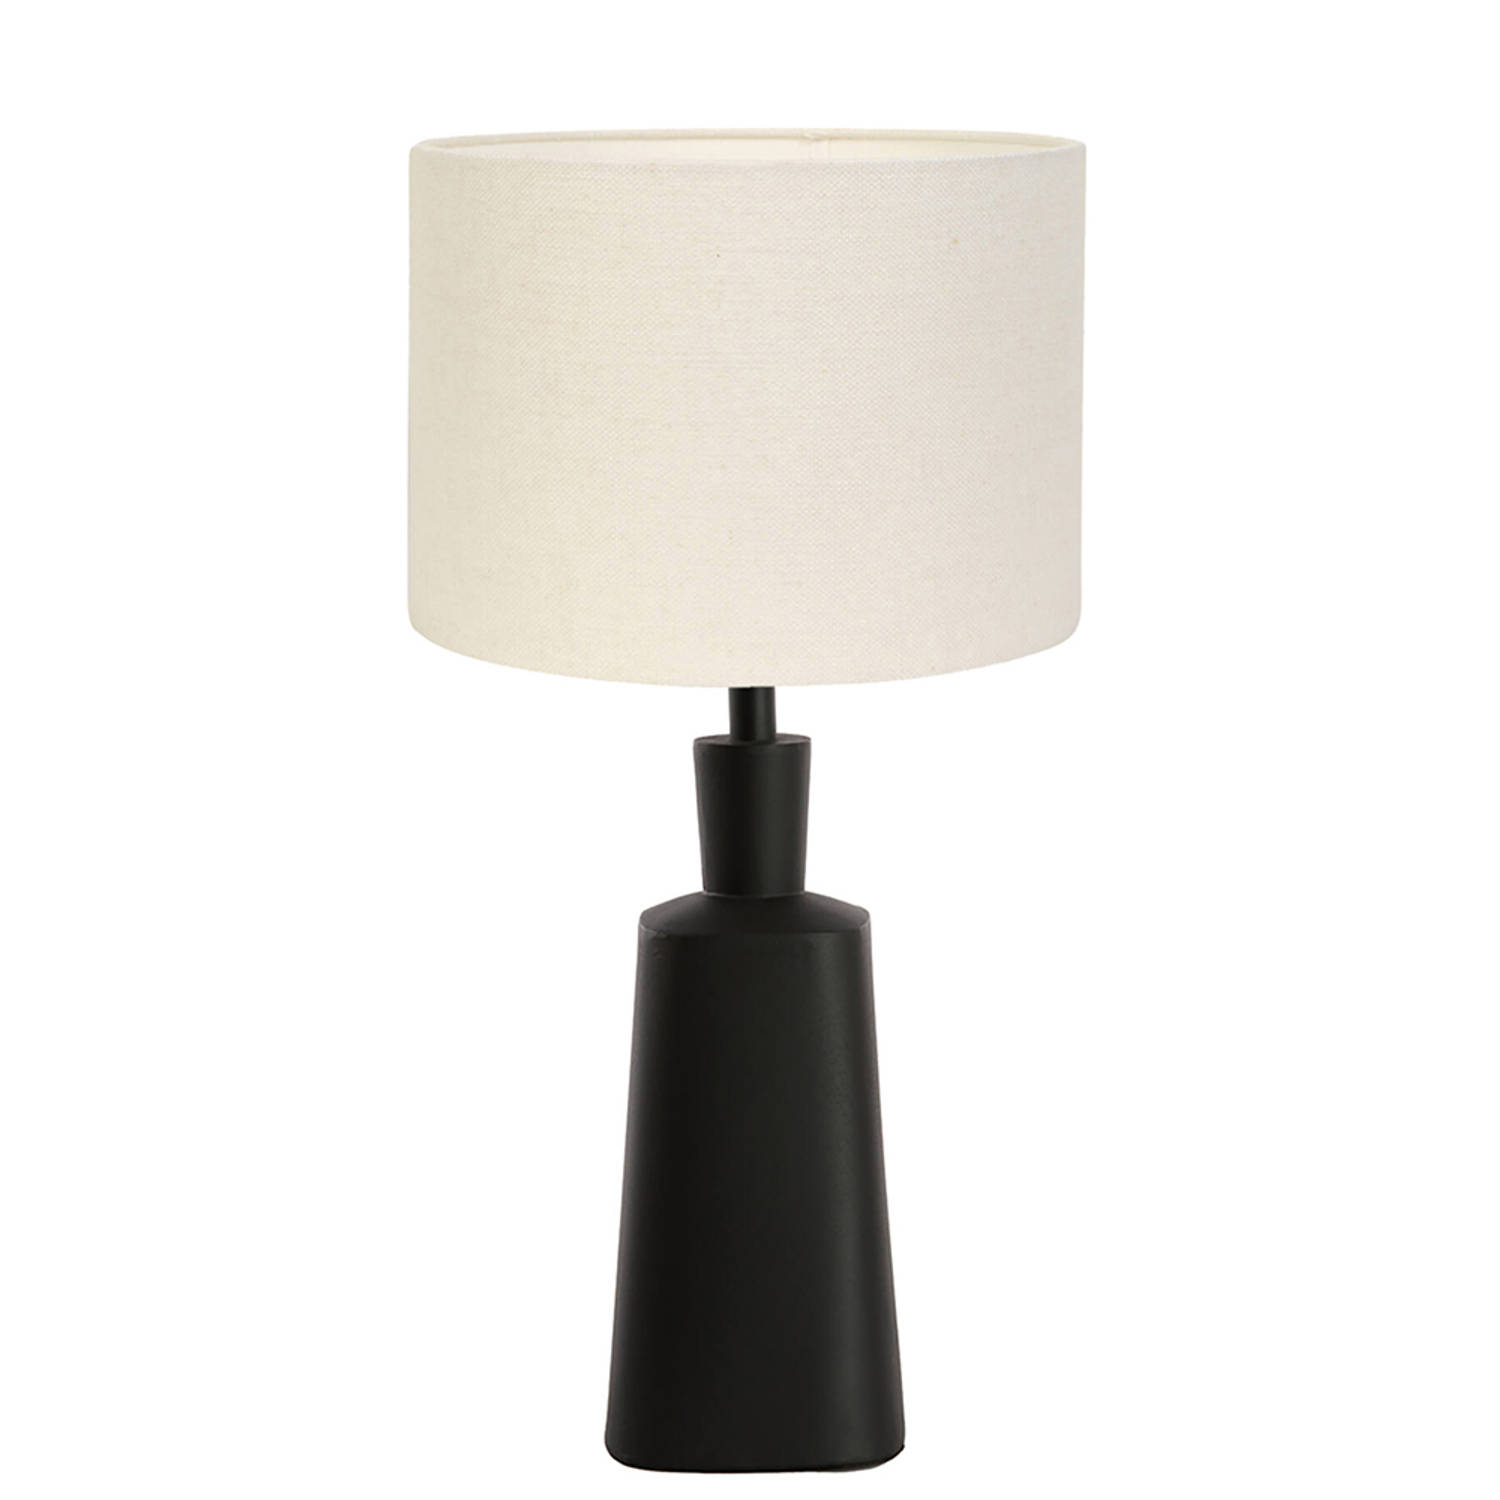 Light and Living Donah tafellamp - Ø 30 cm - E27 (grote fitting) - wit